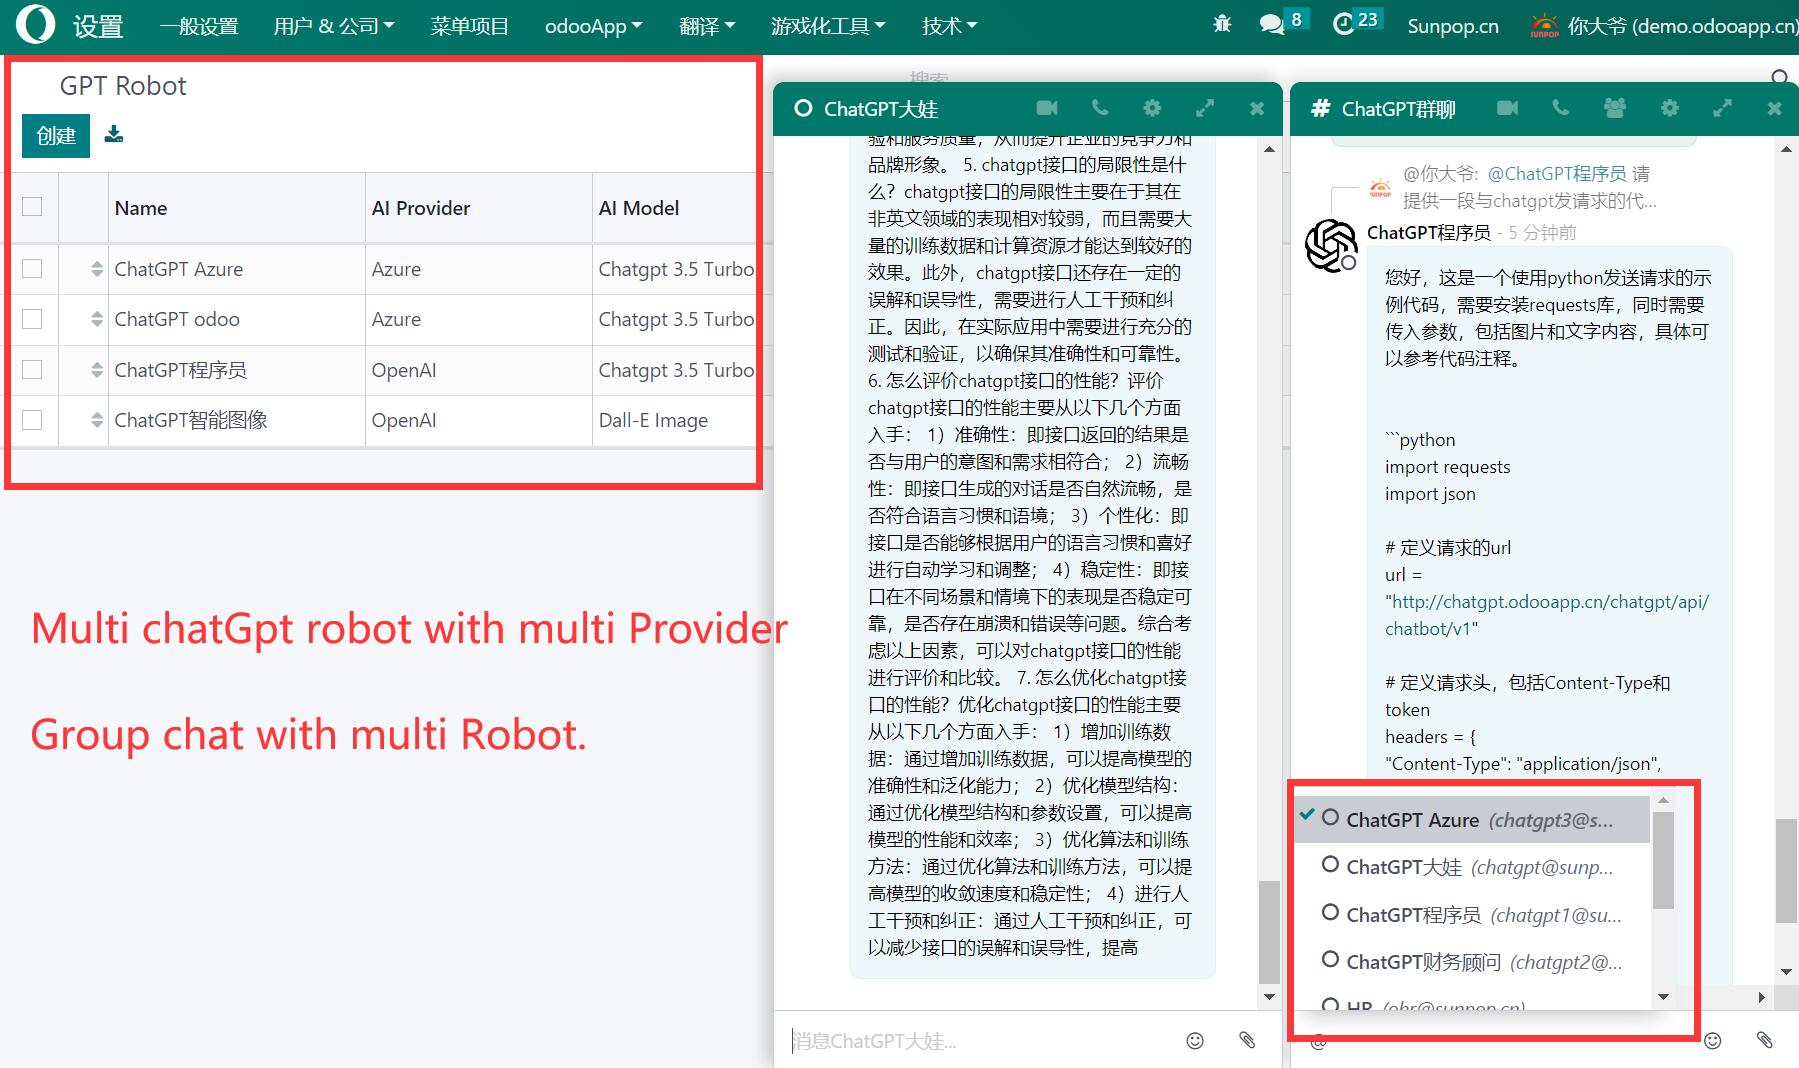  Open Ai for more smart. Microsoft Azure chatgpt for china user.